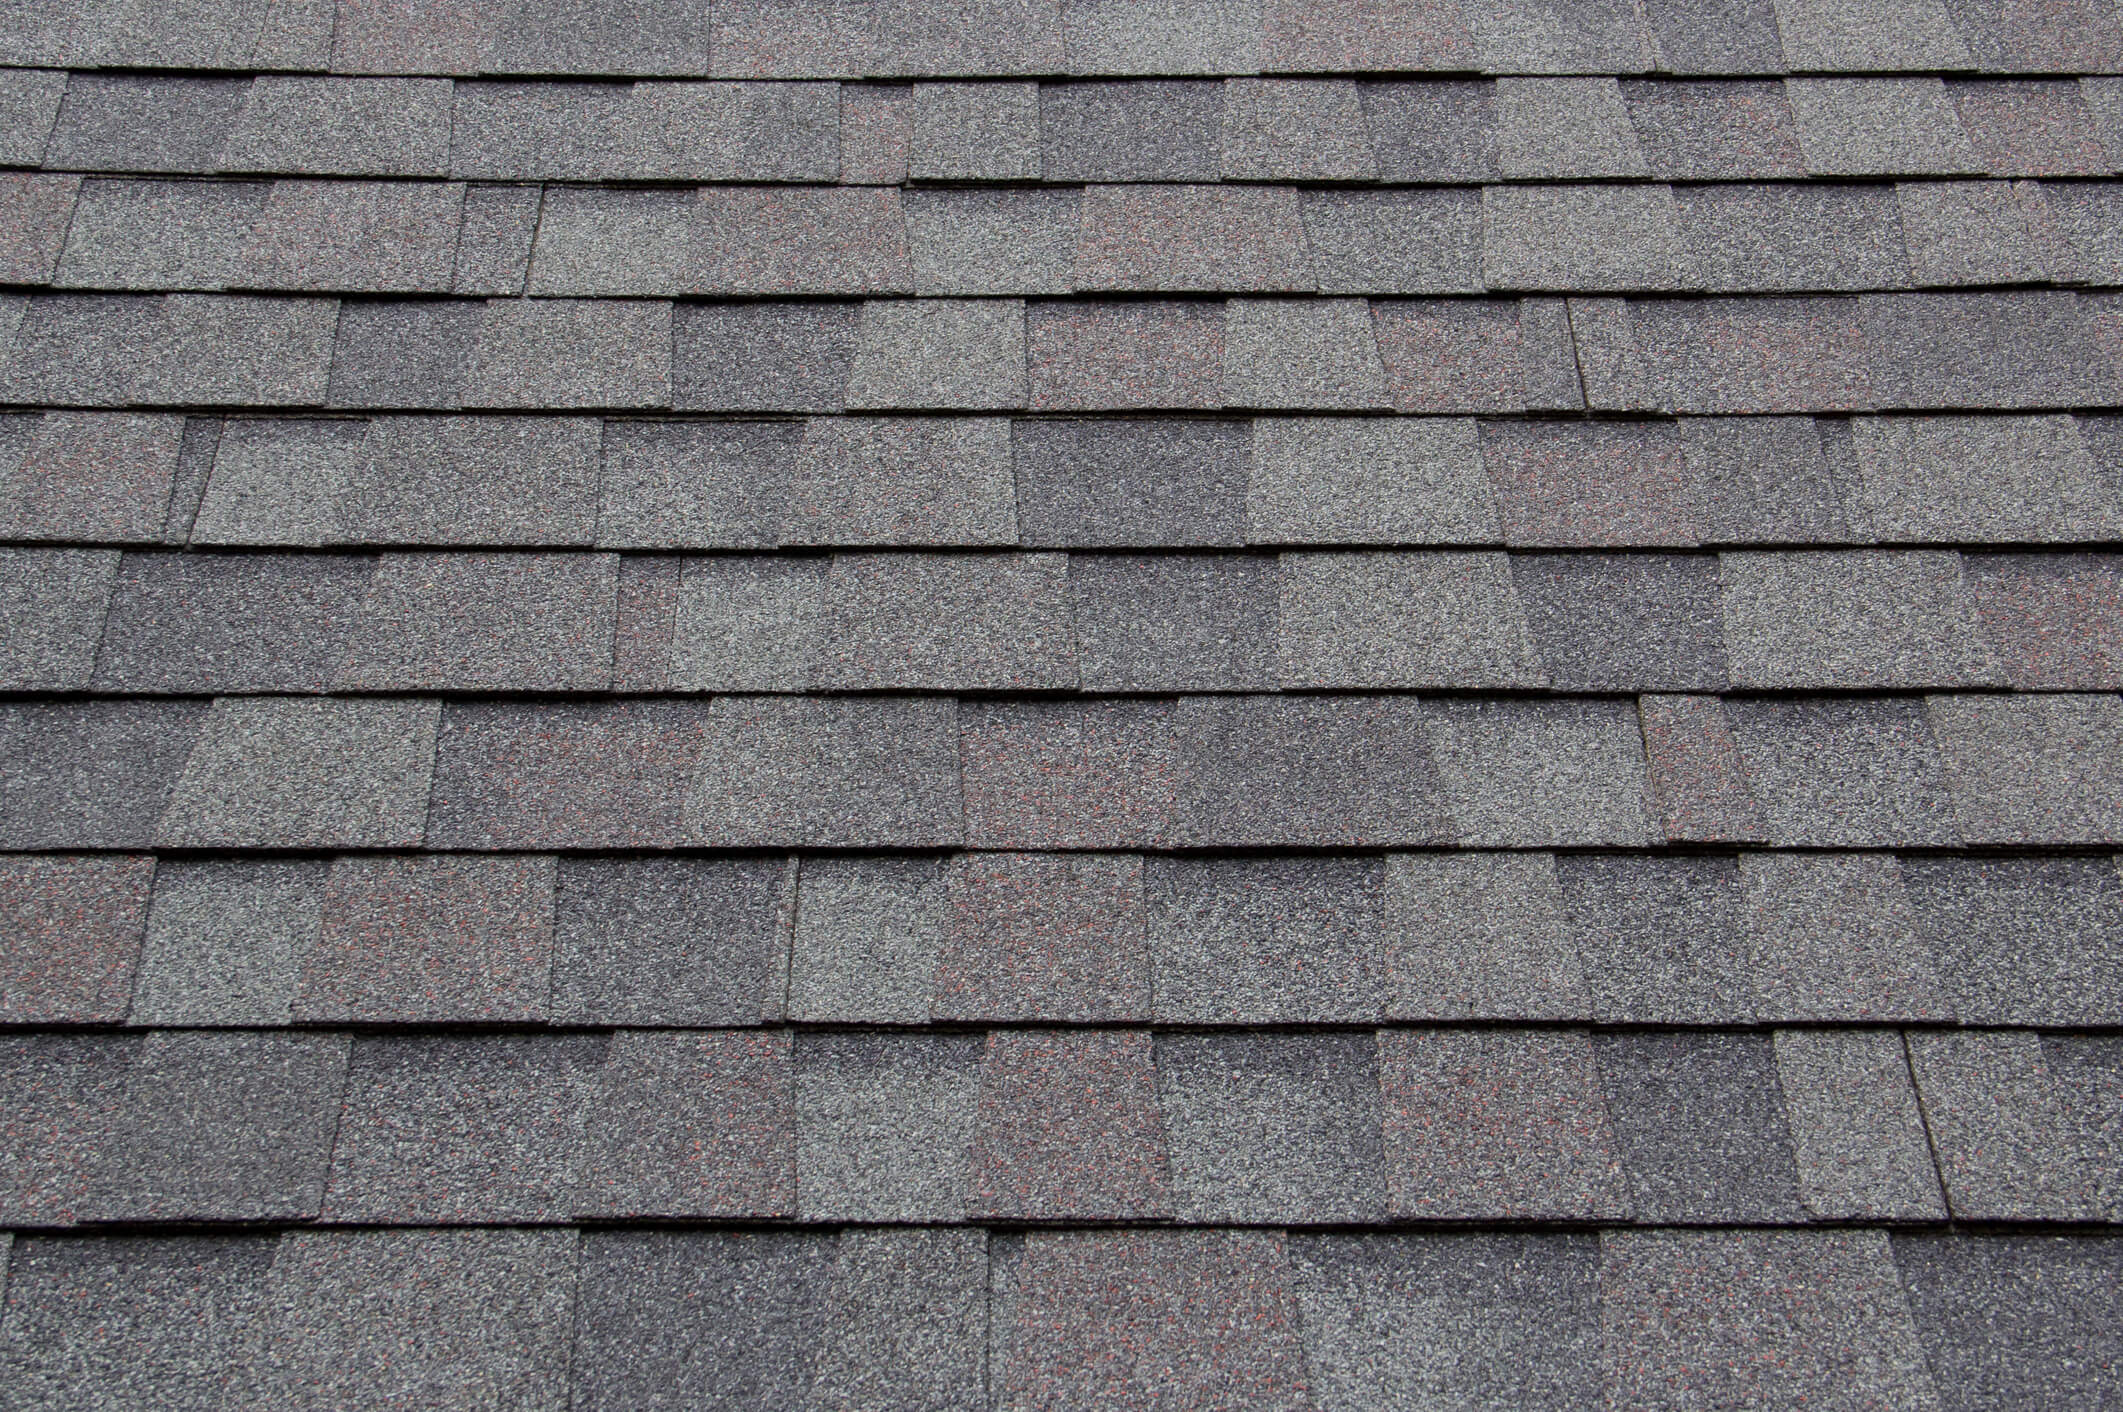 Architectural shingles are stylish and sturdy.